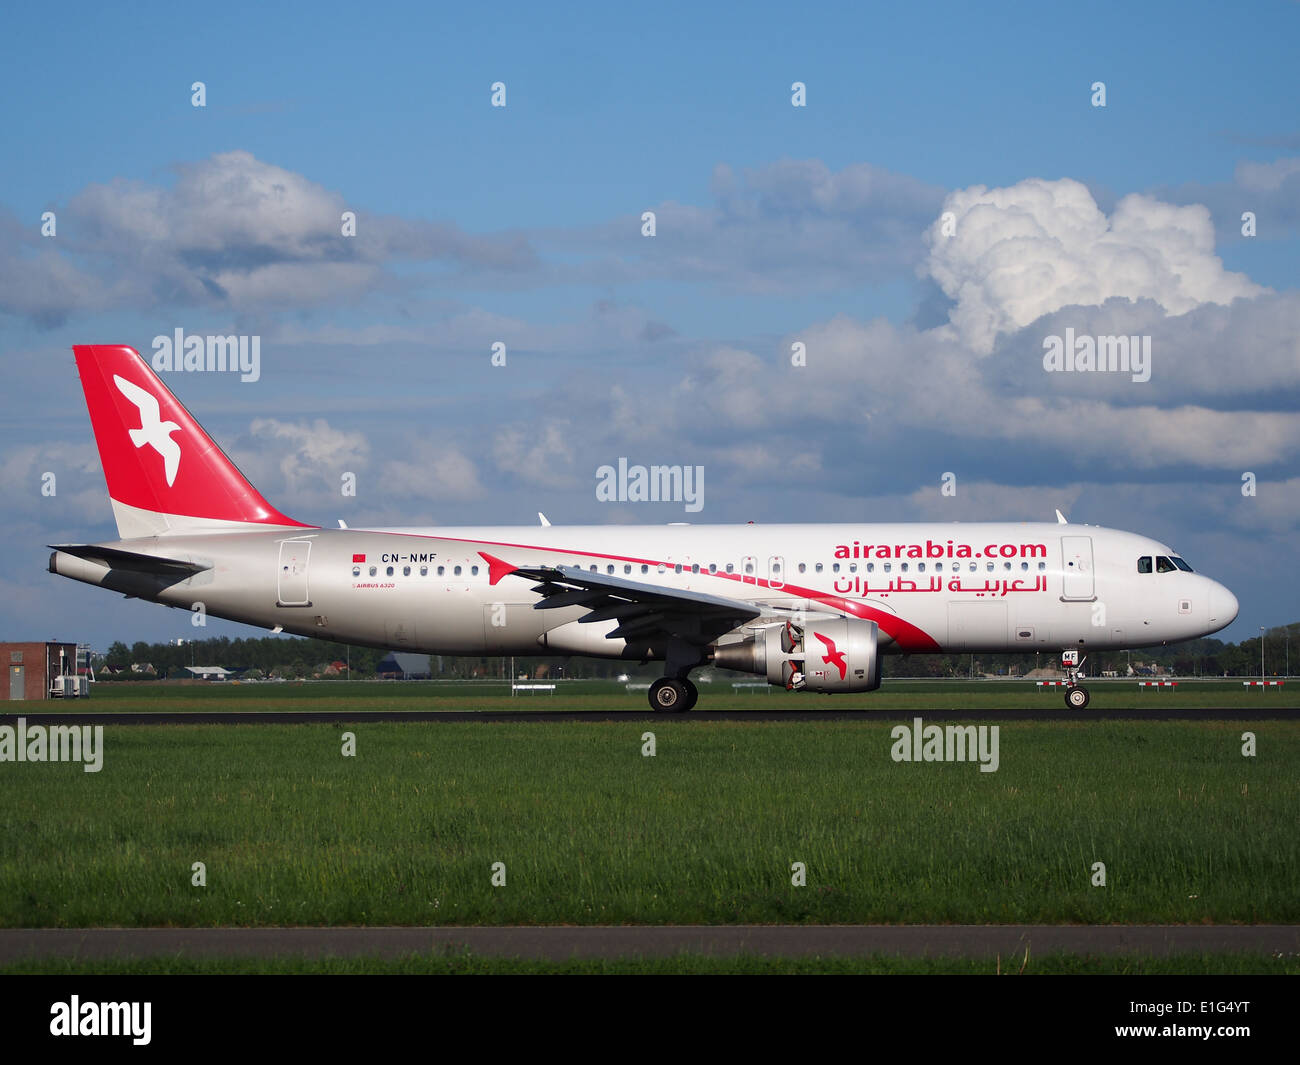 CN-NMF, landing at Schiphol (AMS - EHAM), The Netherlands, 06May2014 Stock Photo